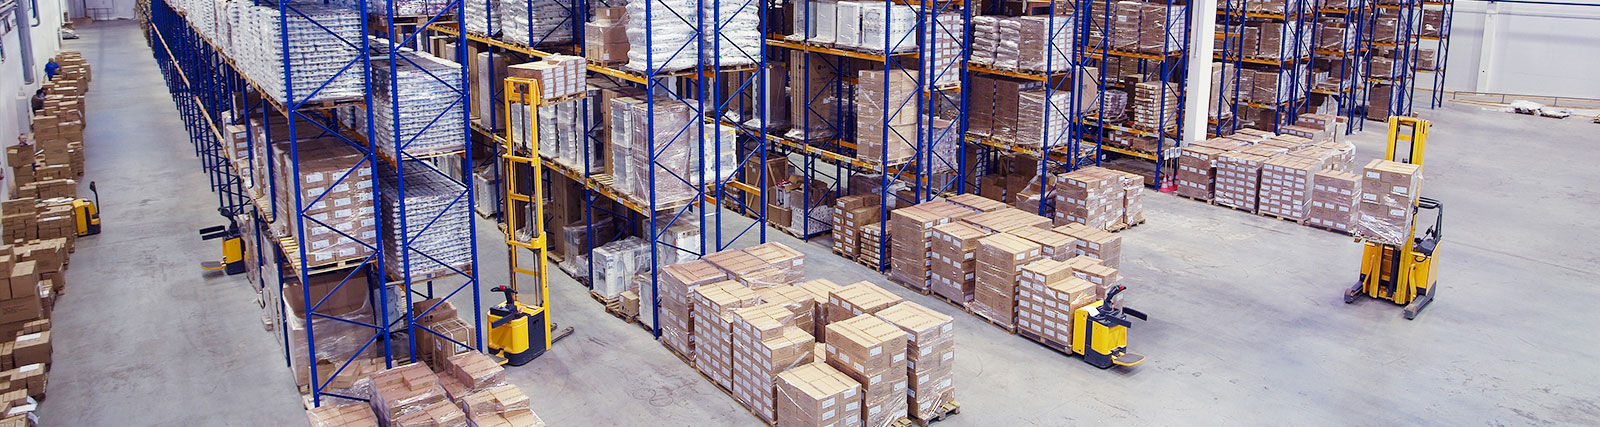 warehouse with aisles of rack